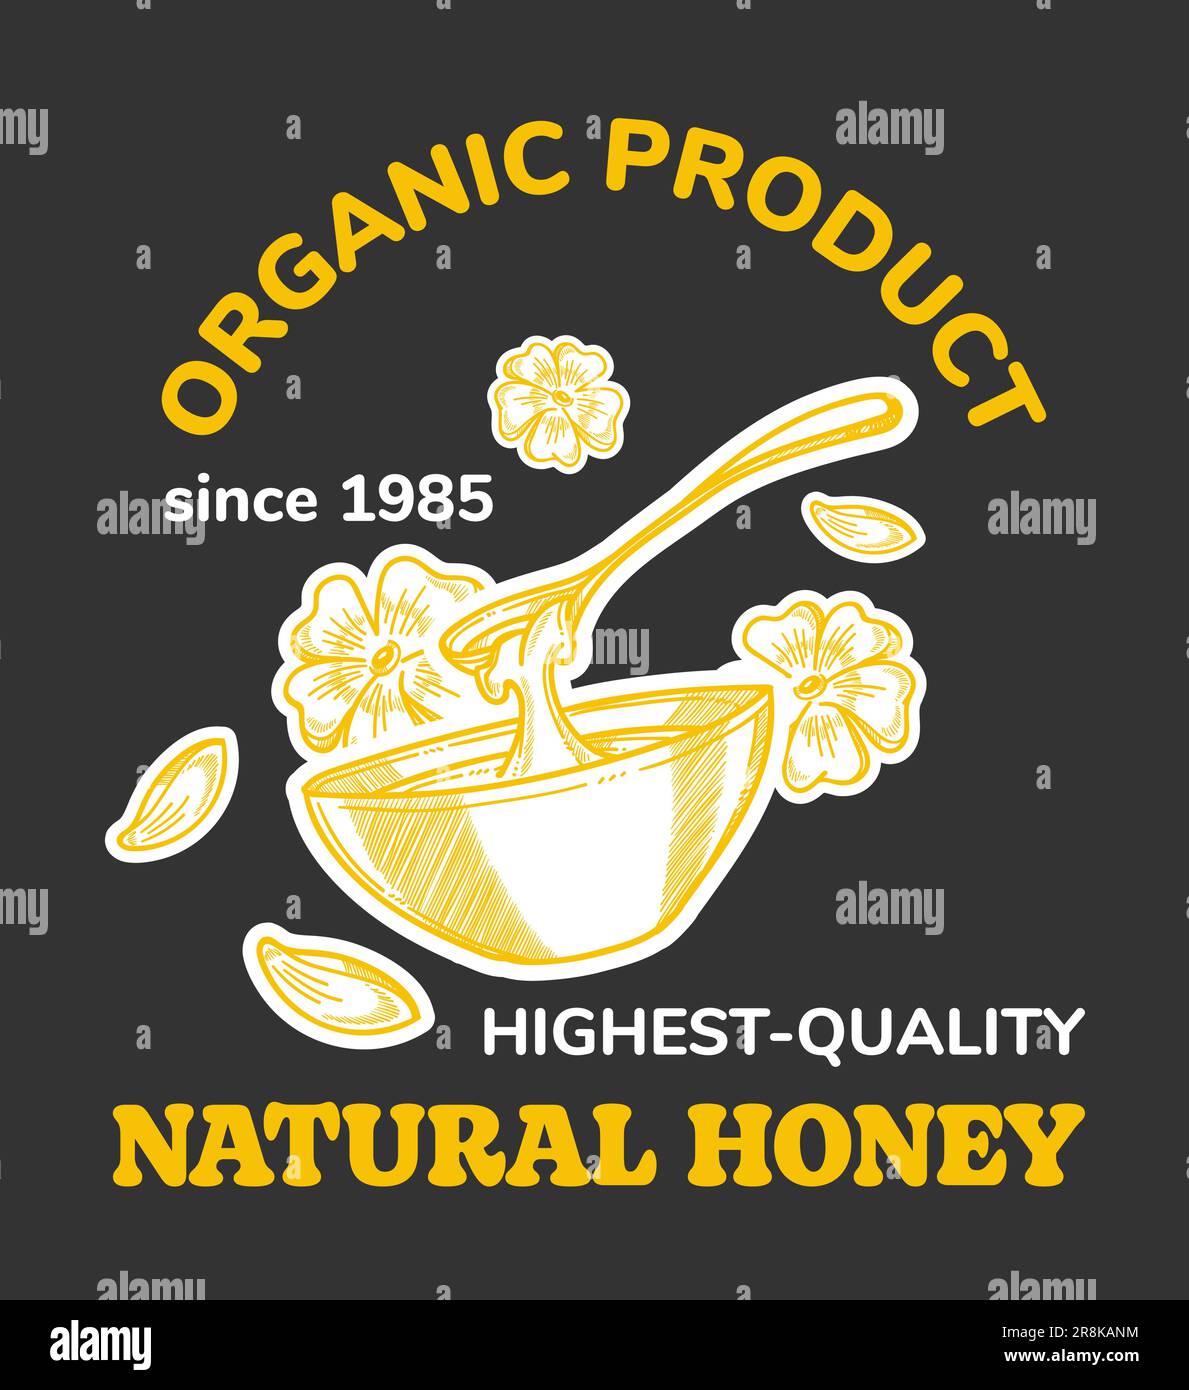 Organic product natural honey, since 1985 quality Stock Vector